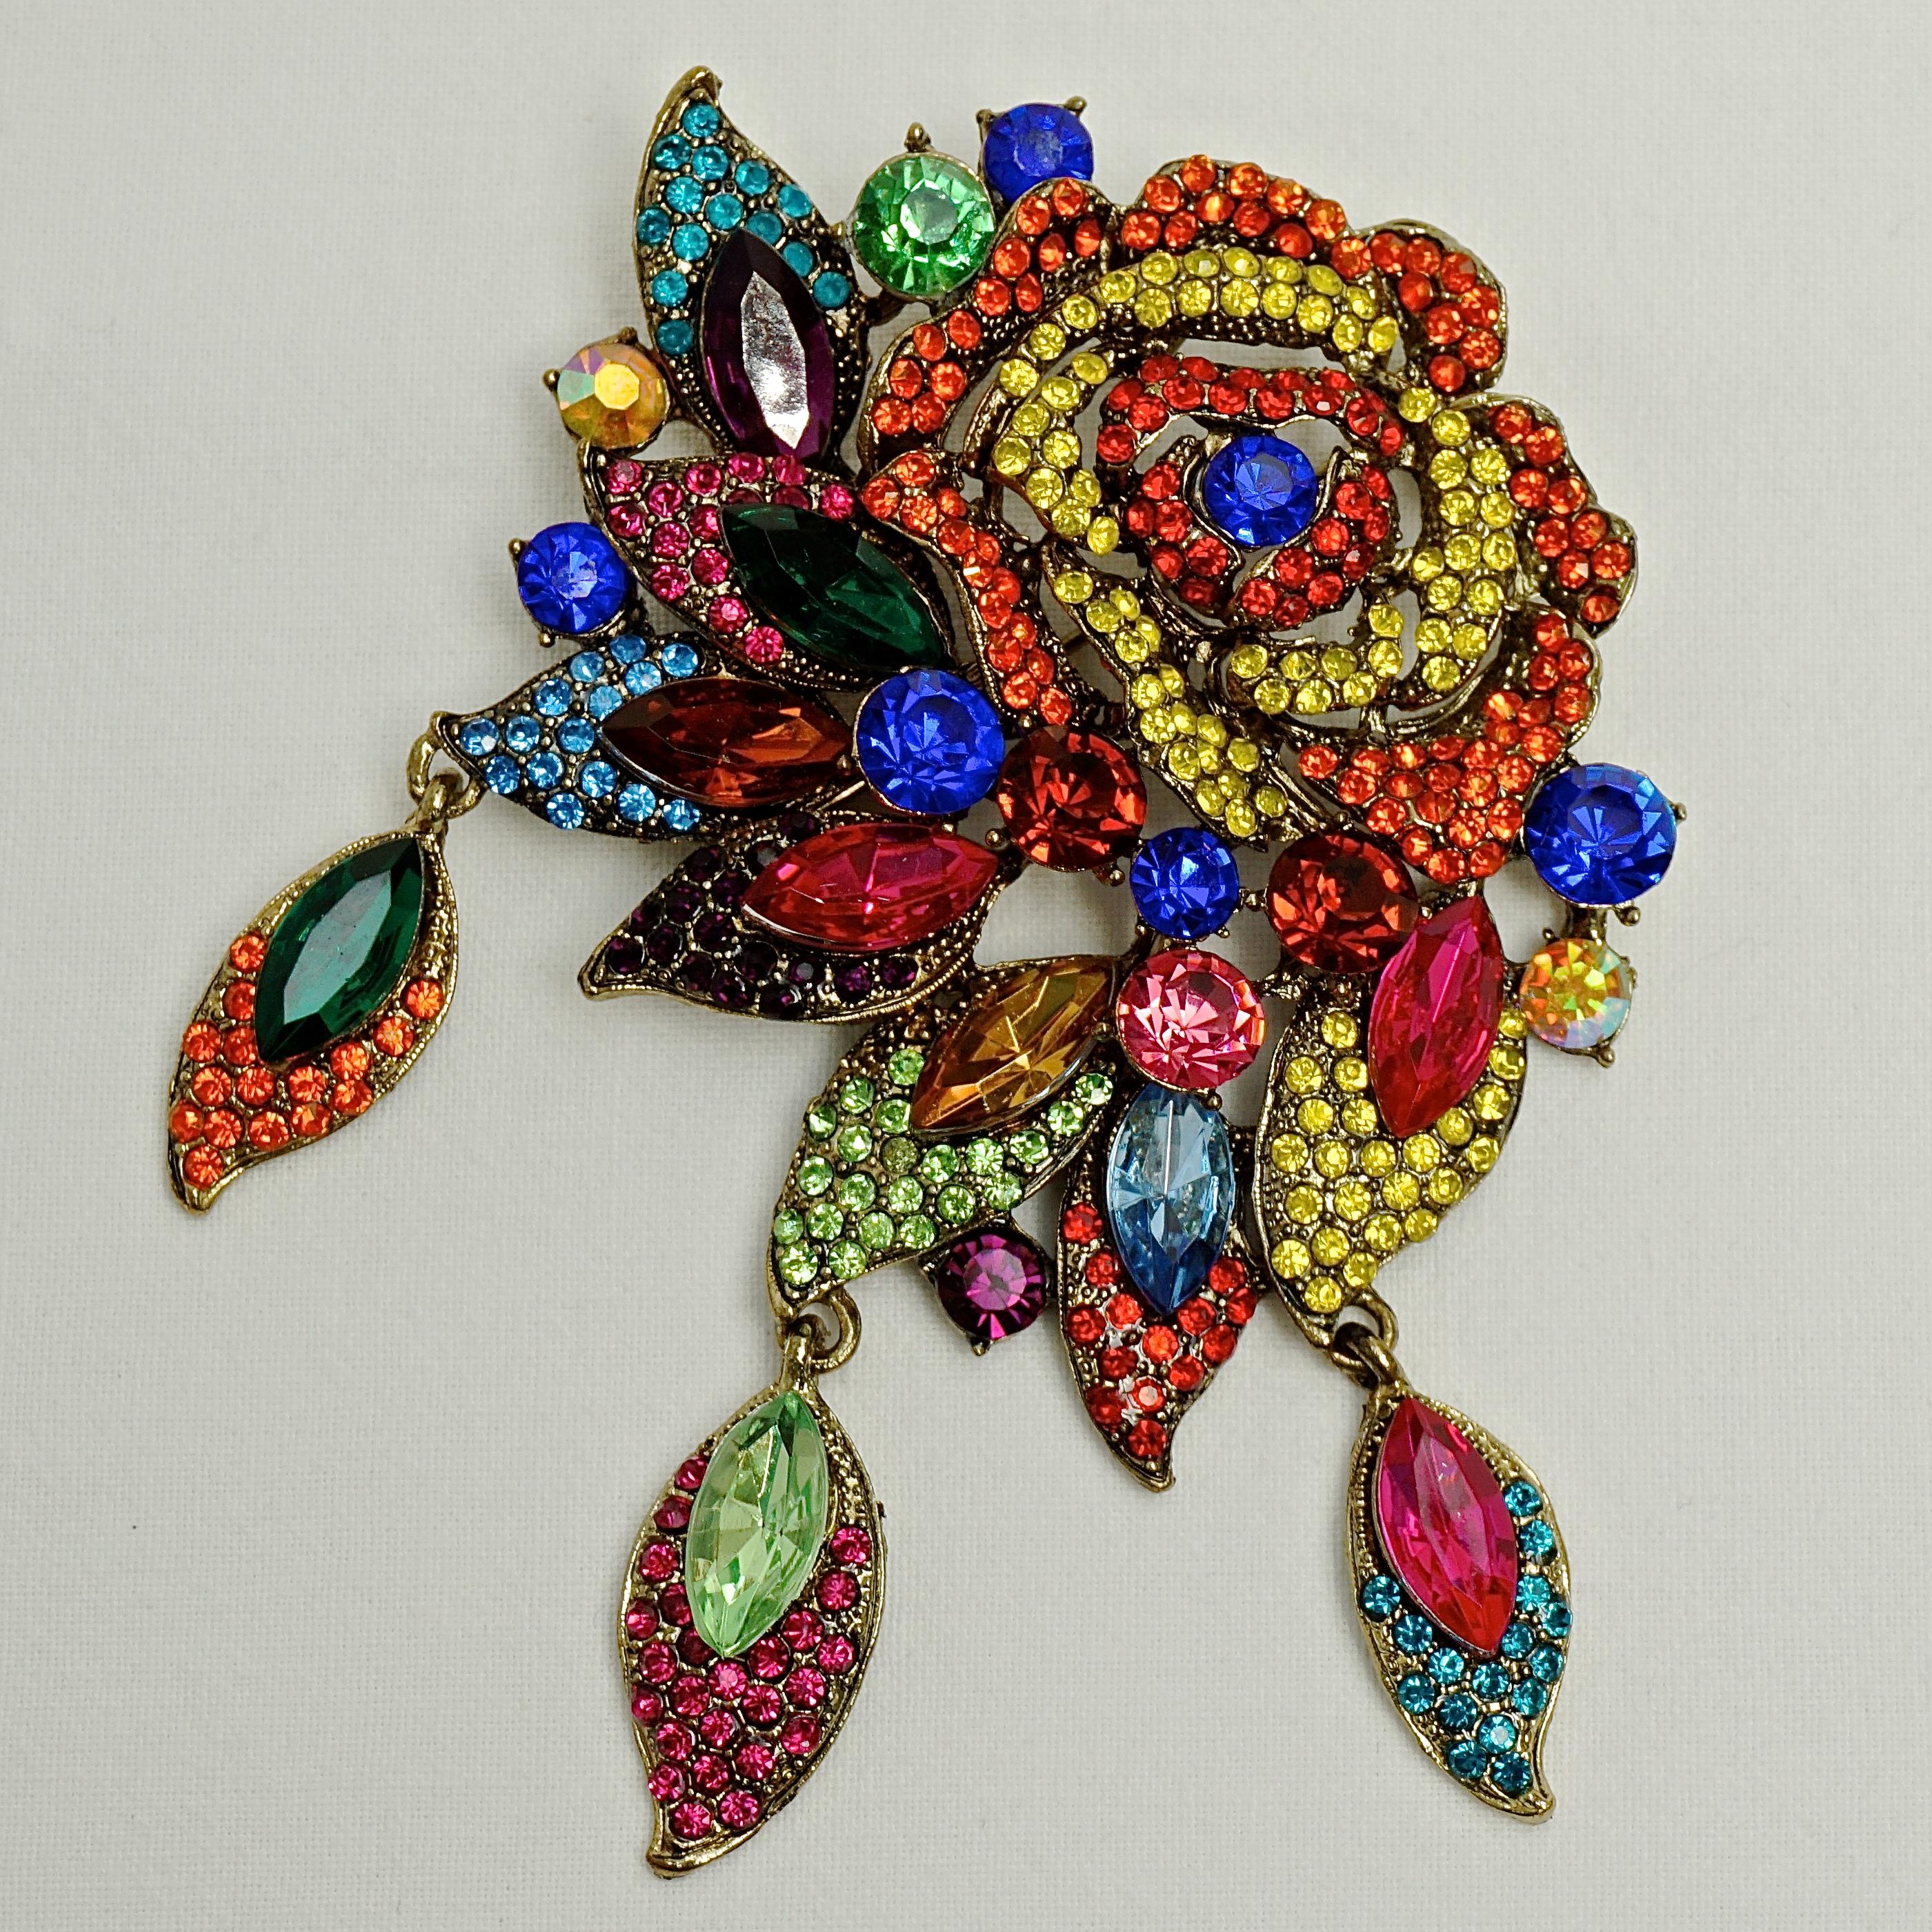 Large vintage Butler & Wilson gold tone flower and leaves brooch, with sparkling vibrant multi coloured crystals. Circa 1980s. Measuring length 10cm / 3.9 inches by width 6.5cm / 2.5 inches. The brooch will arrive in its original Butler & Wilson